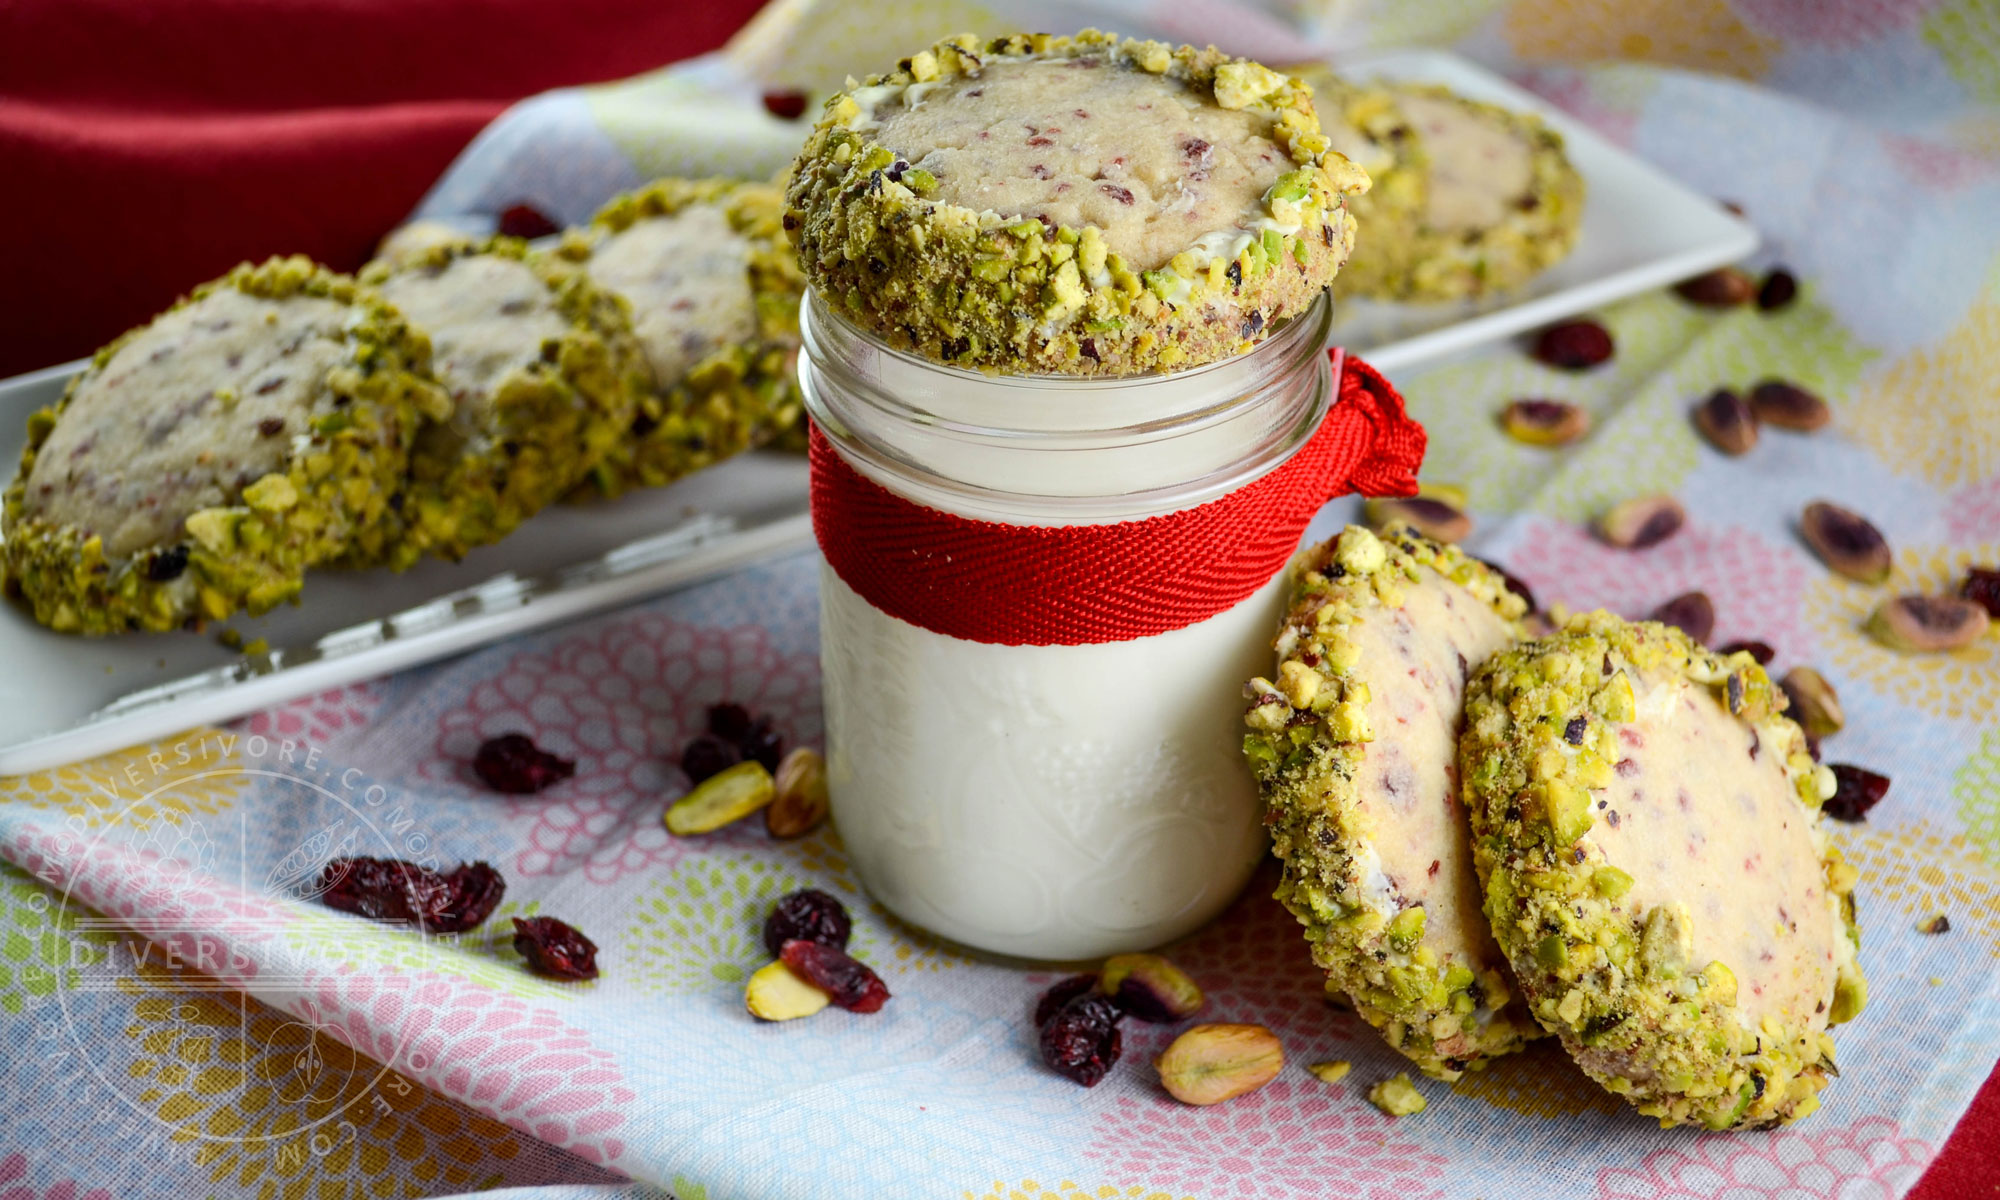 Featured image for “Cranberry Shortbread with White Chocolate and Pistachios”